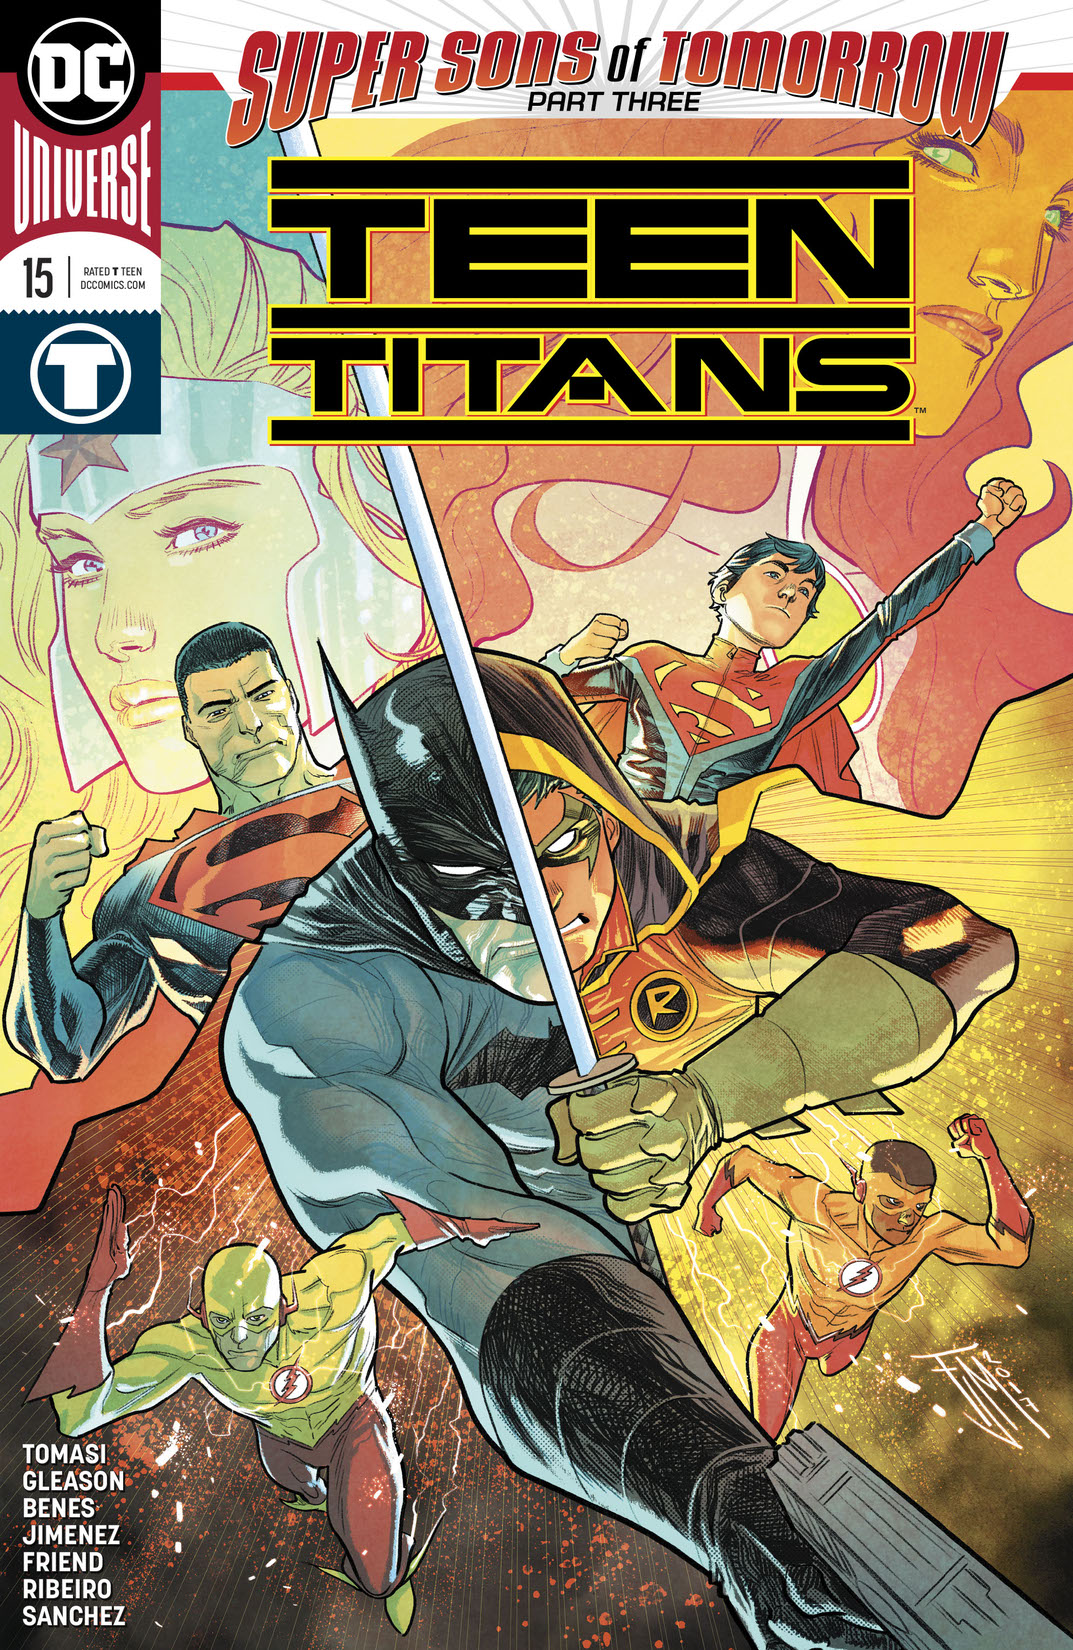 Teen Titans (2016-) #15 preview images